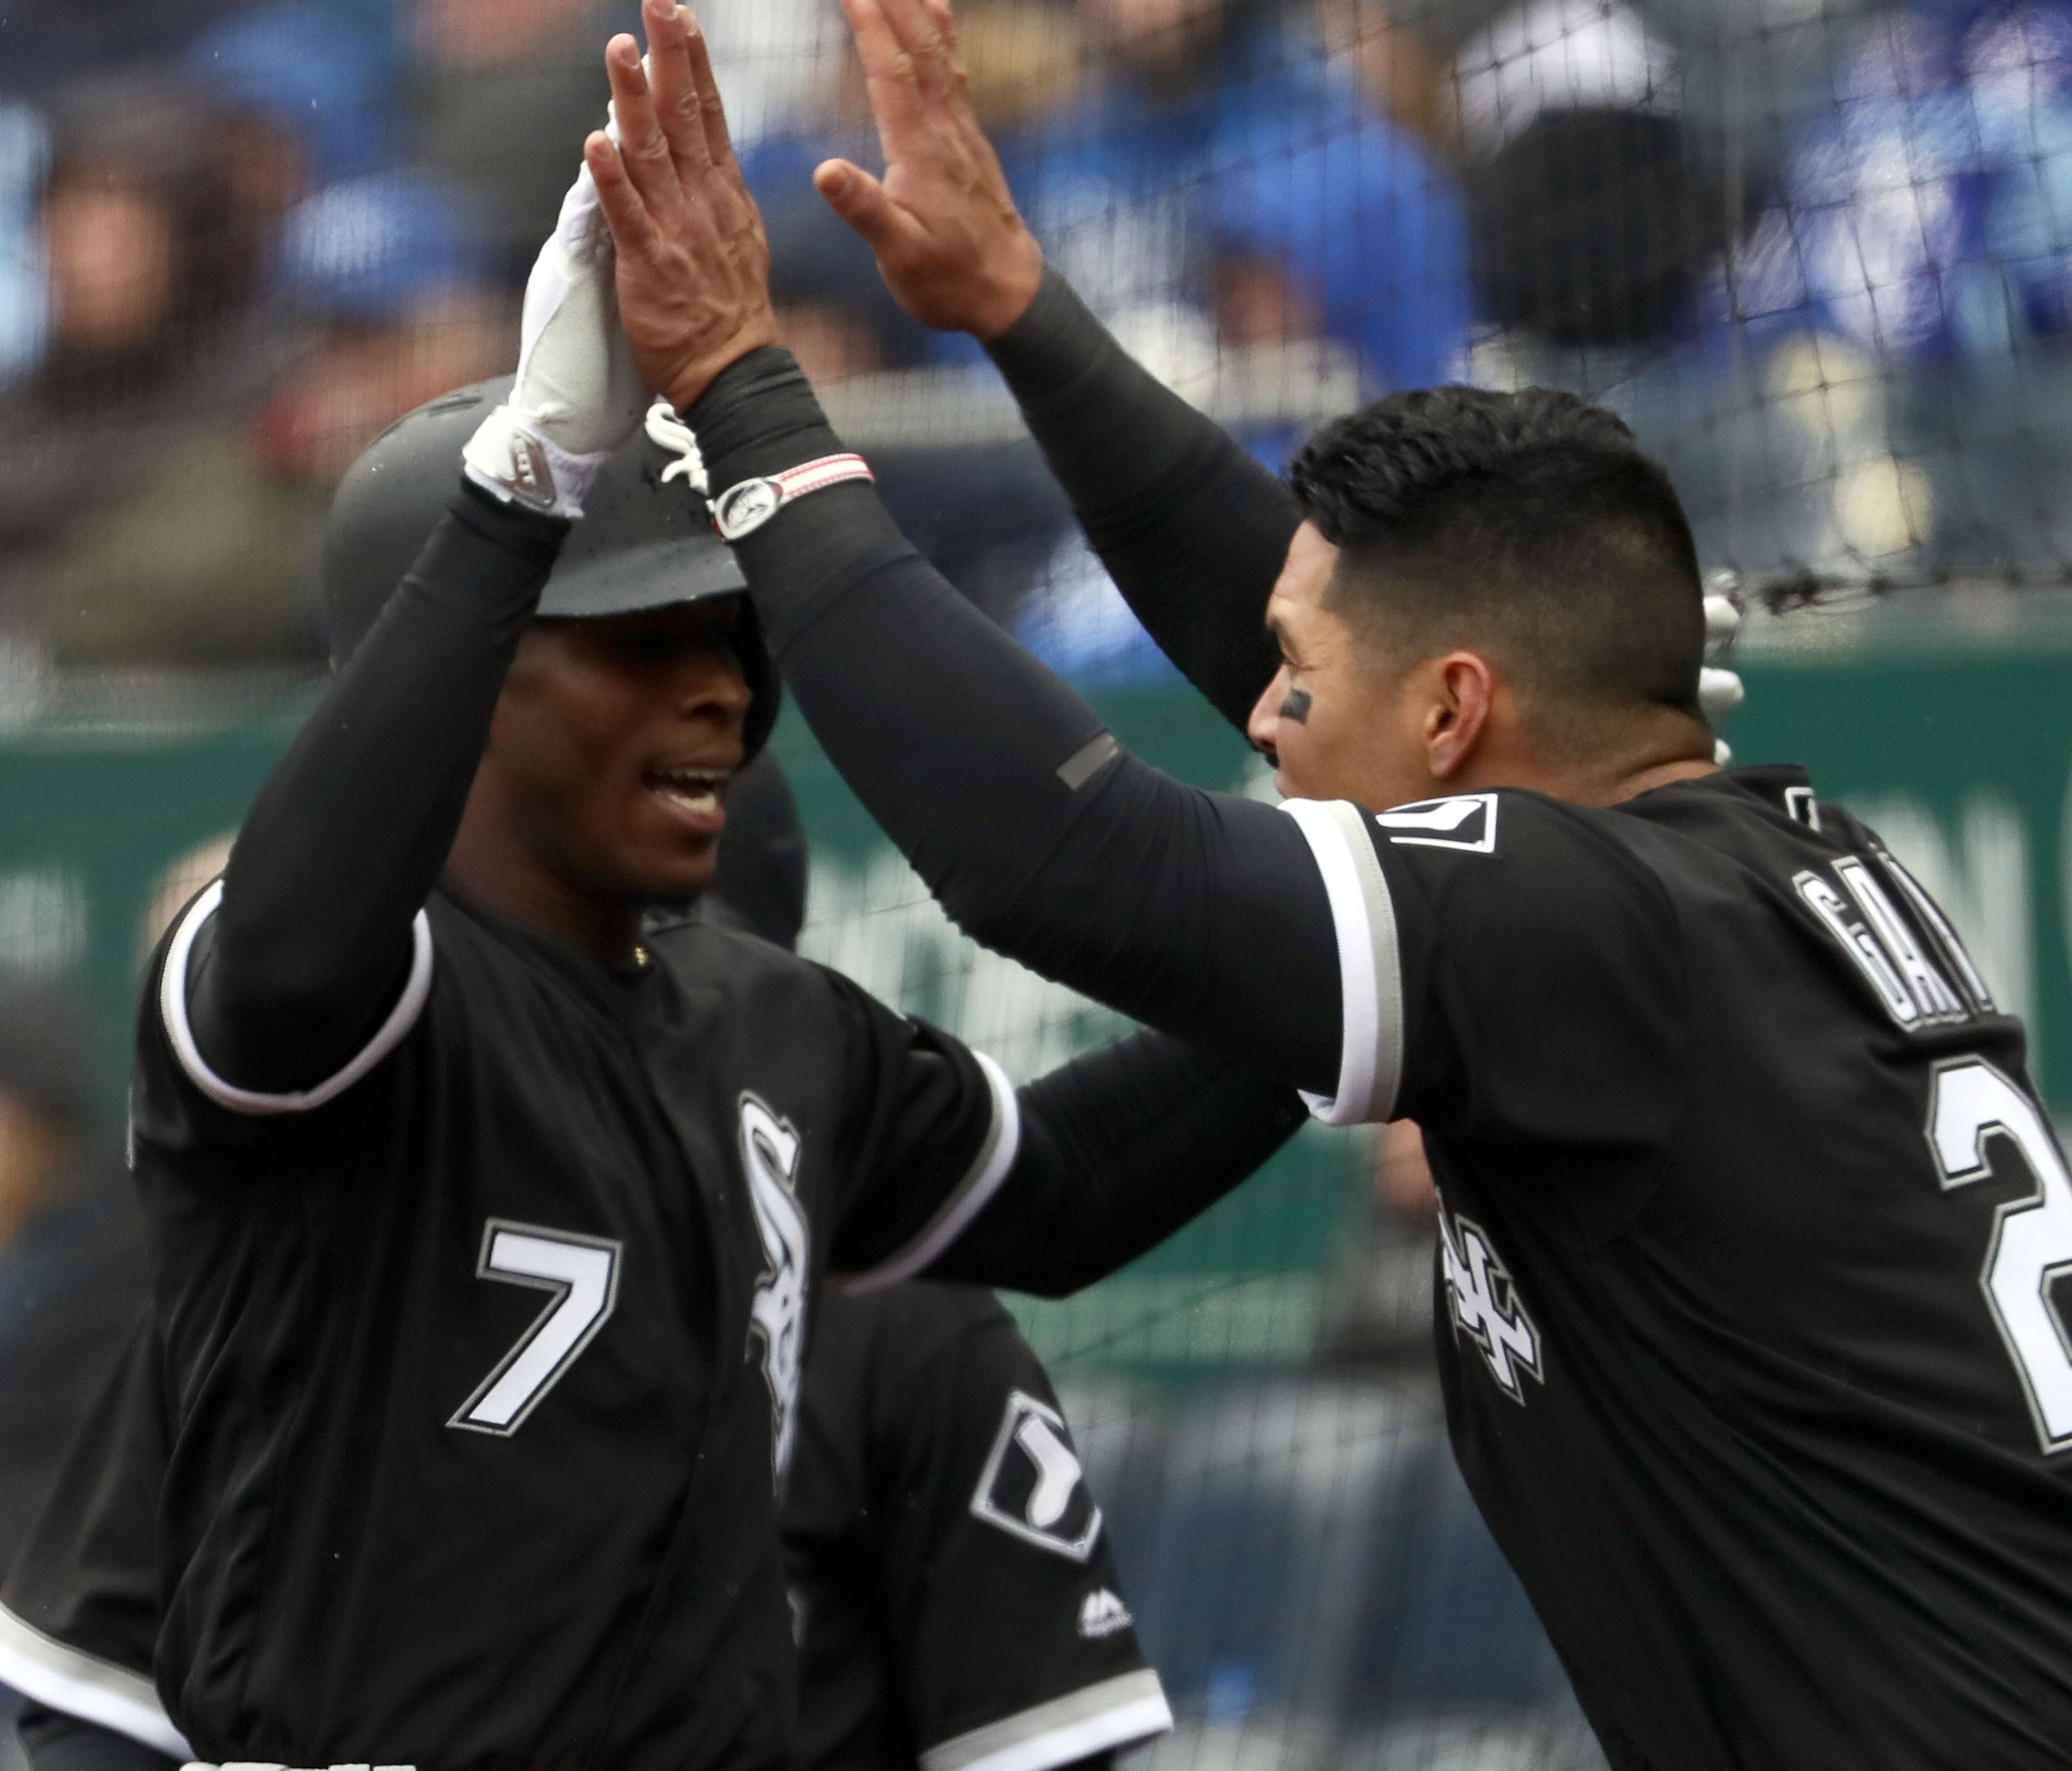 The White Sox tied a record with six home runs on Opening Day.